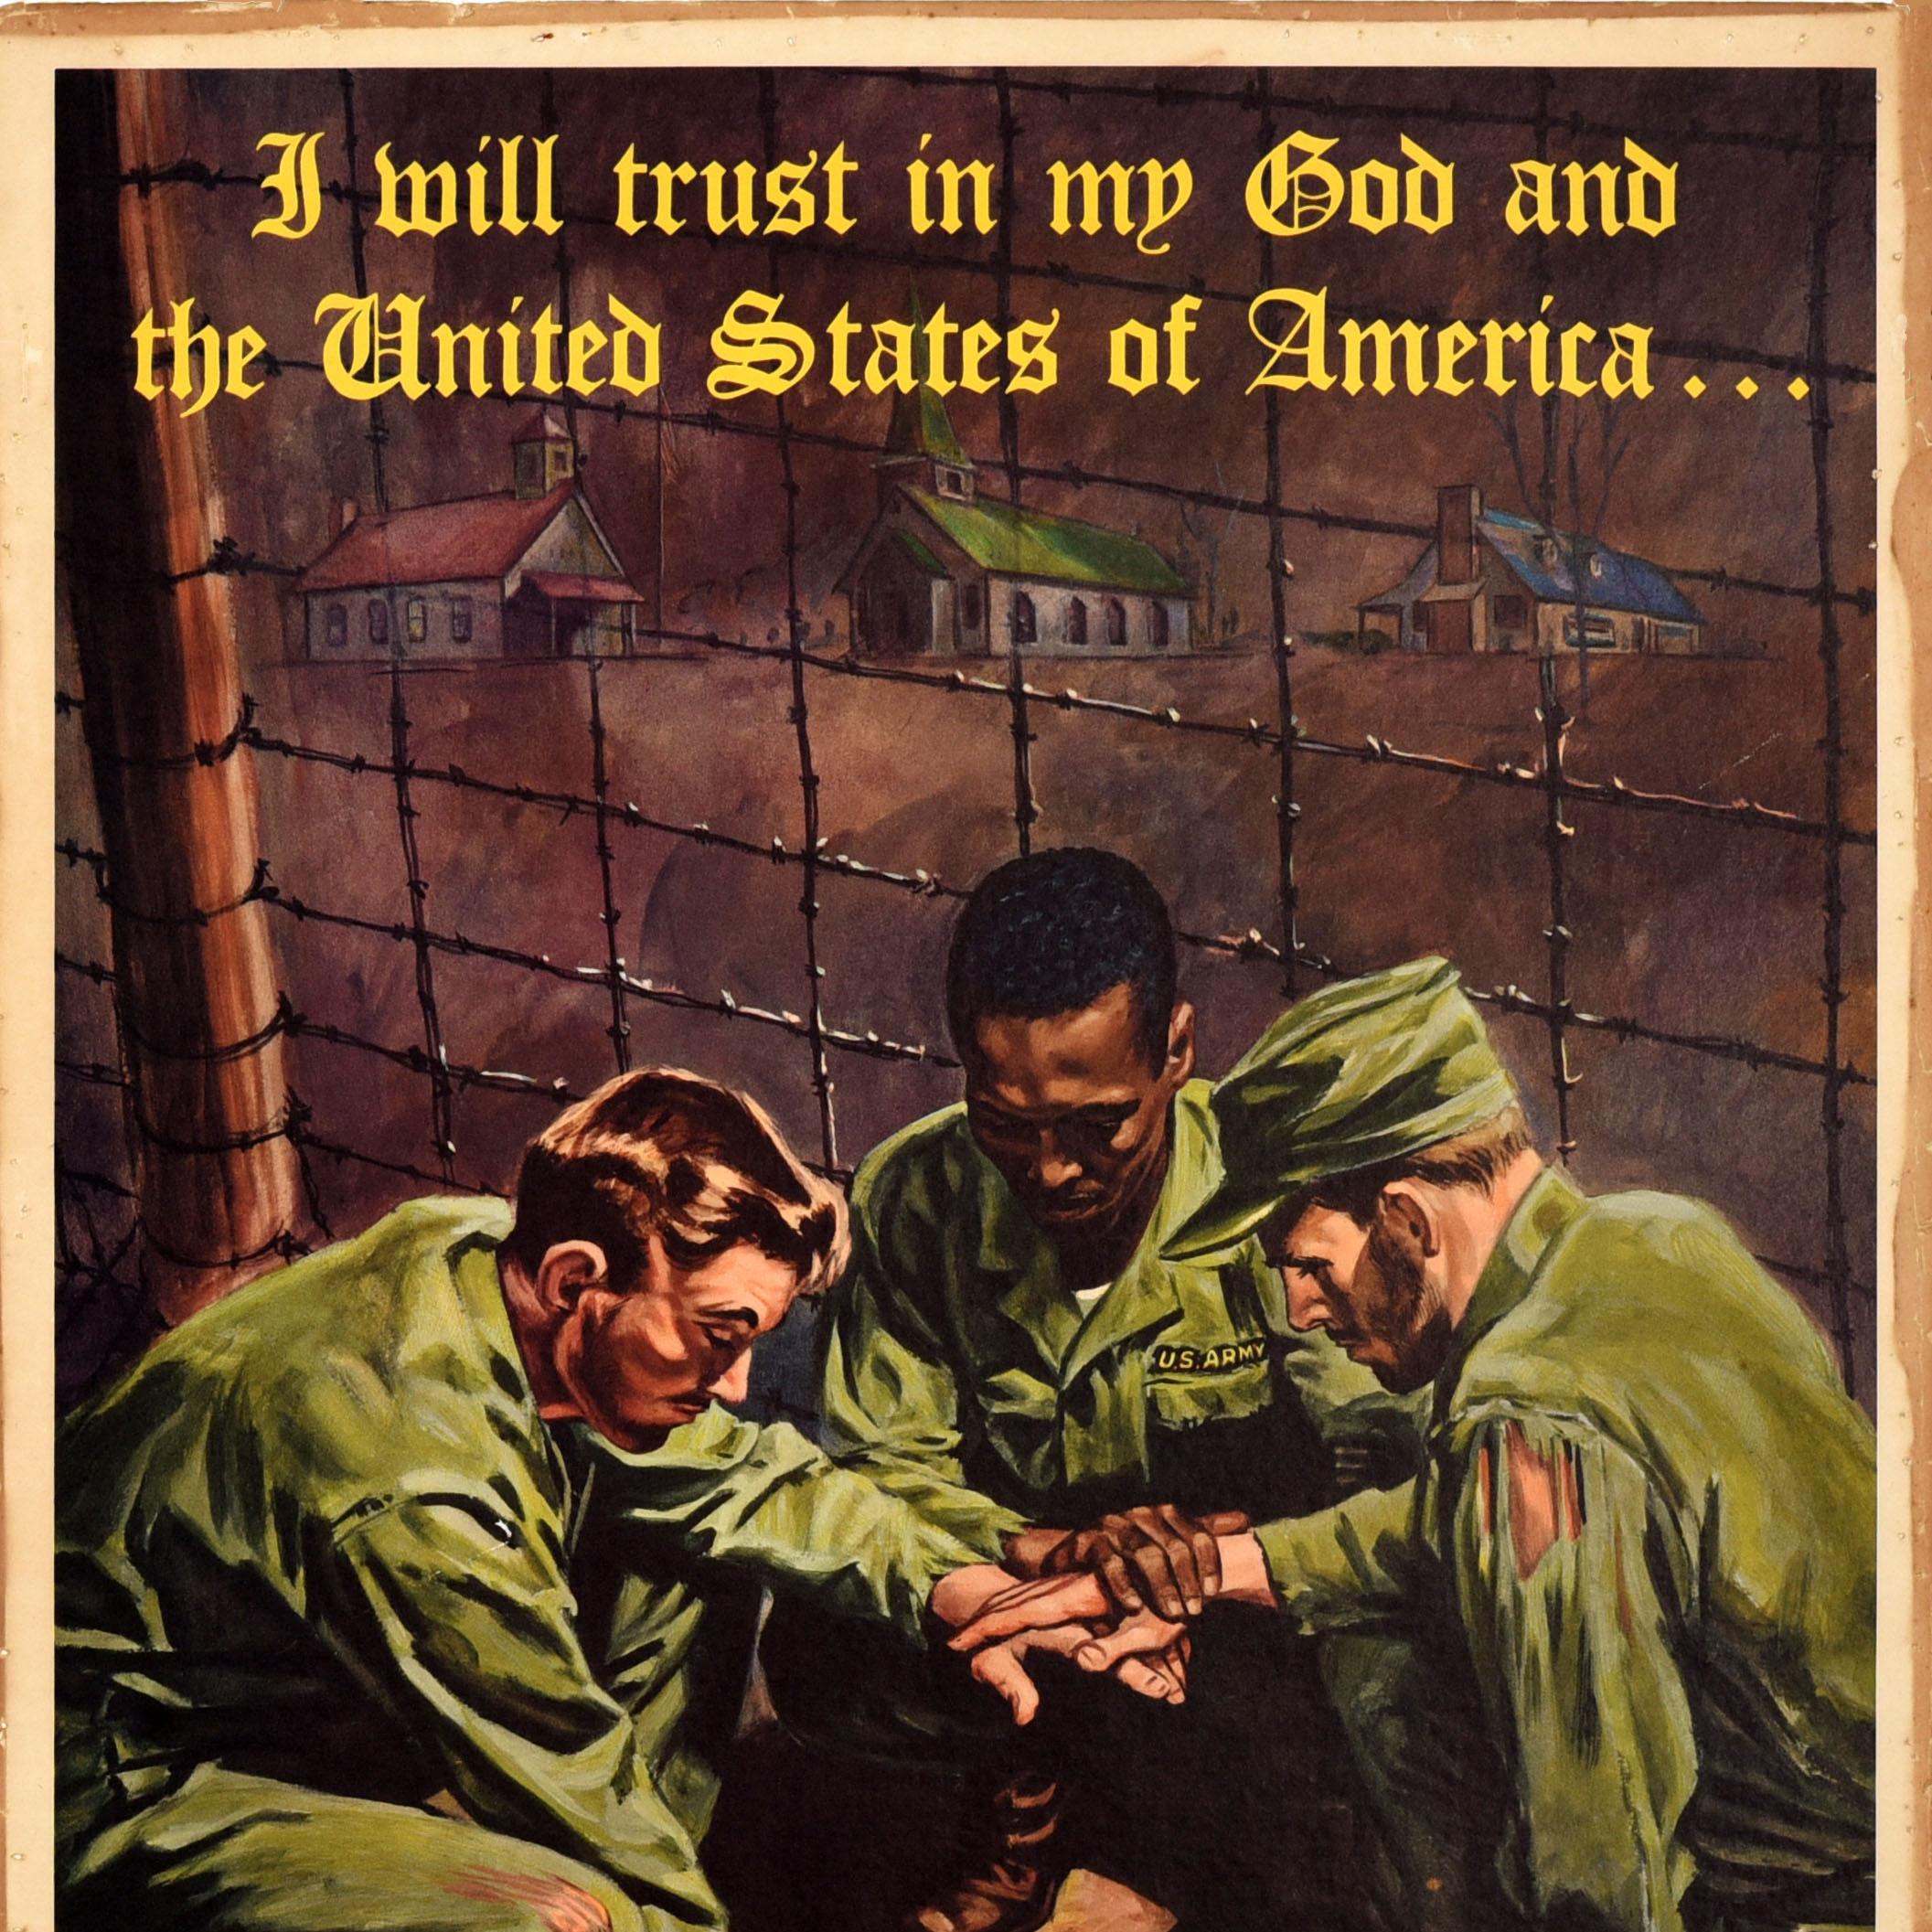 Scarce original vintage military propaganda poster - I will trust in my God and the United States of America ... I owe this to God Home Country - featuring artwork depicting three US Army soldiers in tattered uniform crouching on the ground in front